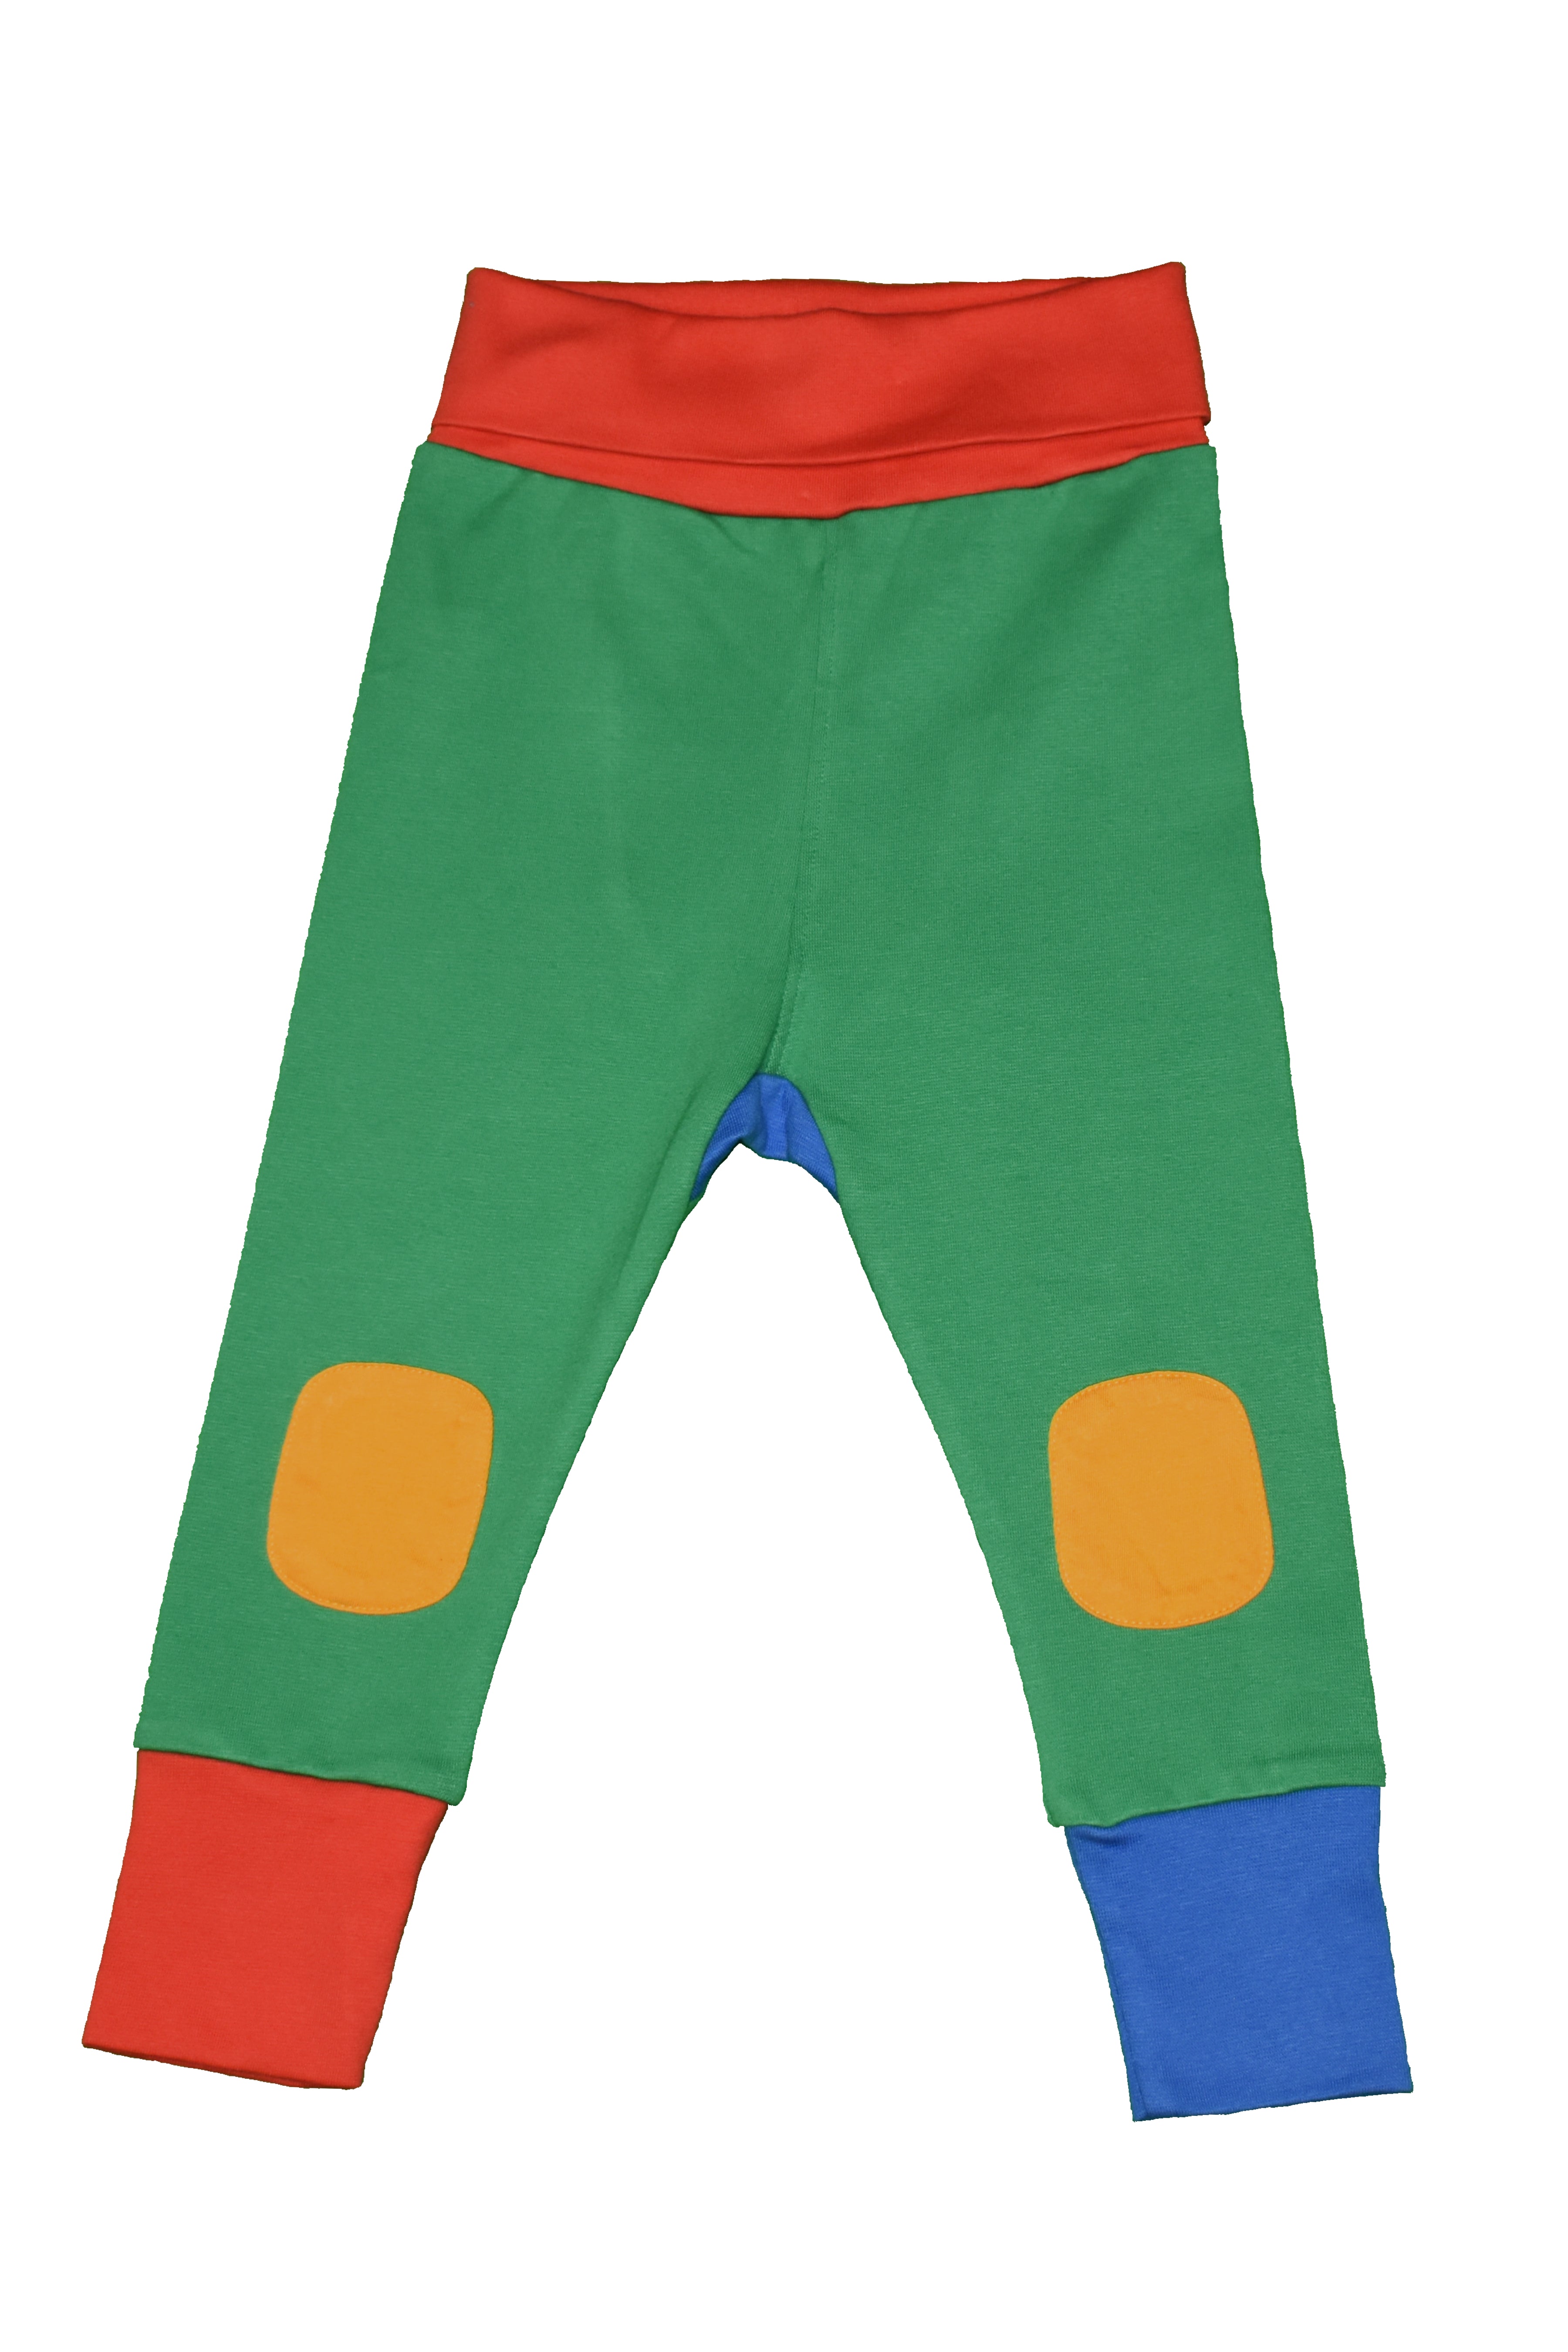 Moromini - Waste Baby Pants - Red/Green/Blue